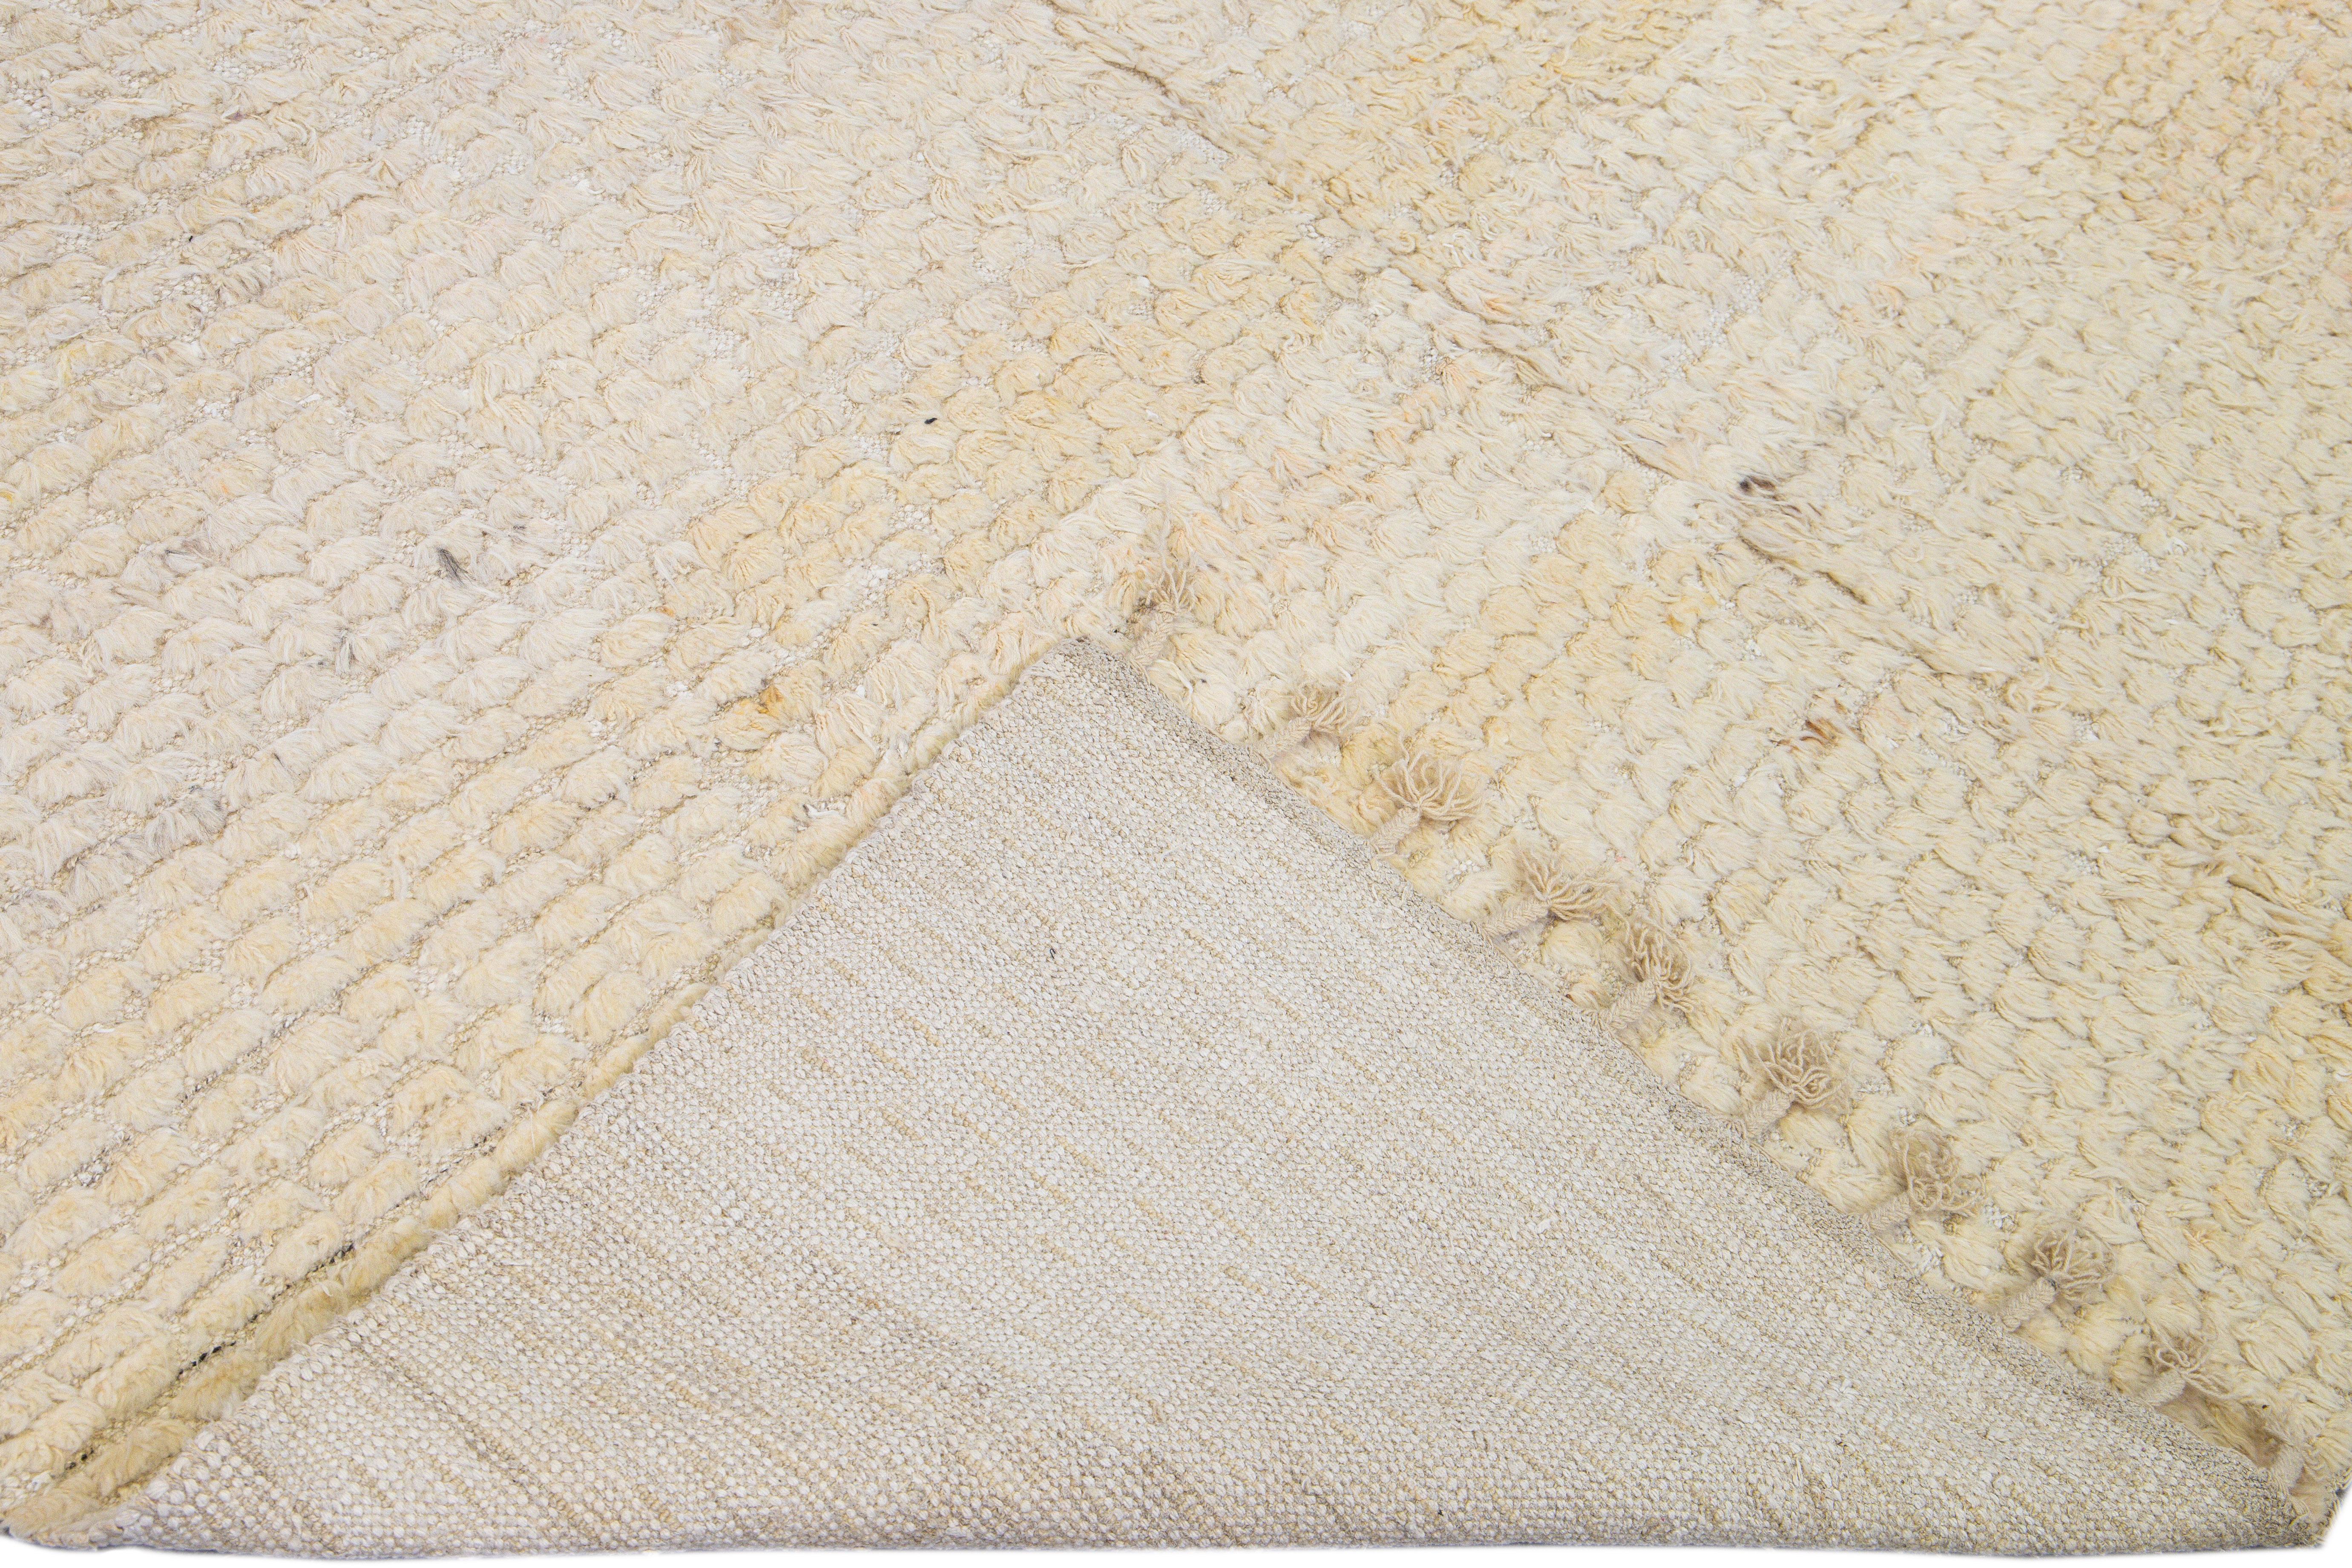 Beautiful vintage Tulu flatweave wool rug with ivory and beige field and accents. This Tulu rug has fringes in a gorgeous all-over solid pattern design.

This rug measures: 8'2